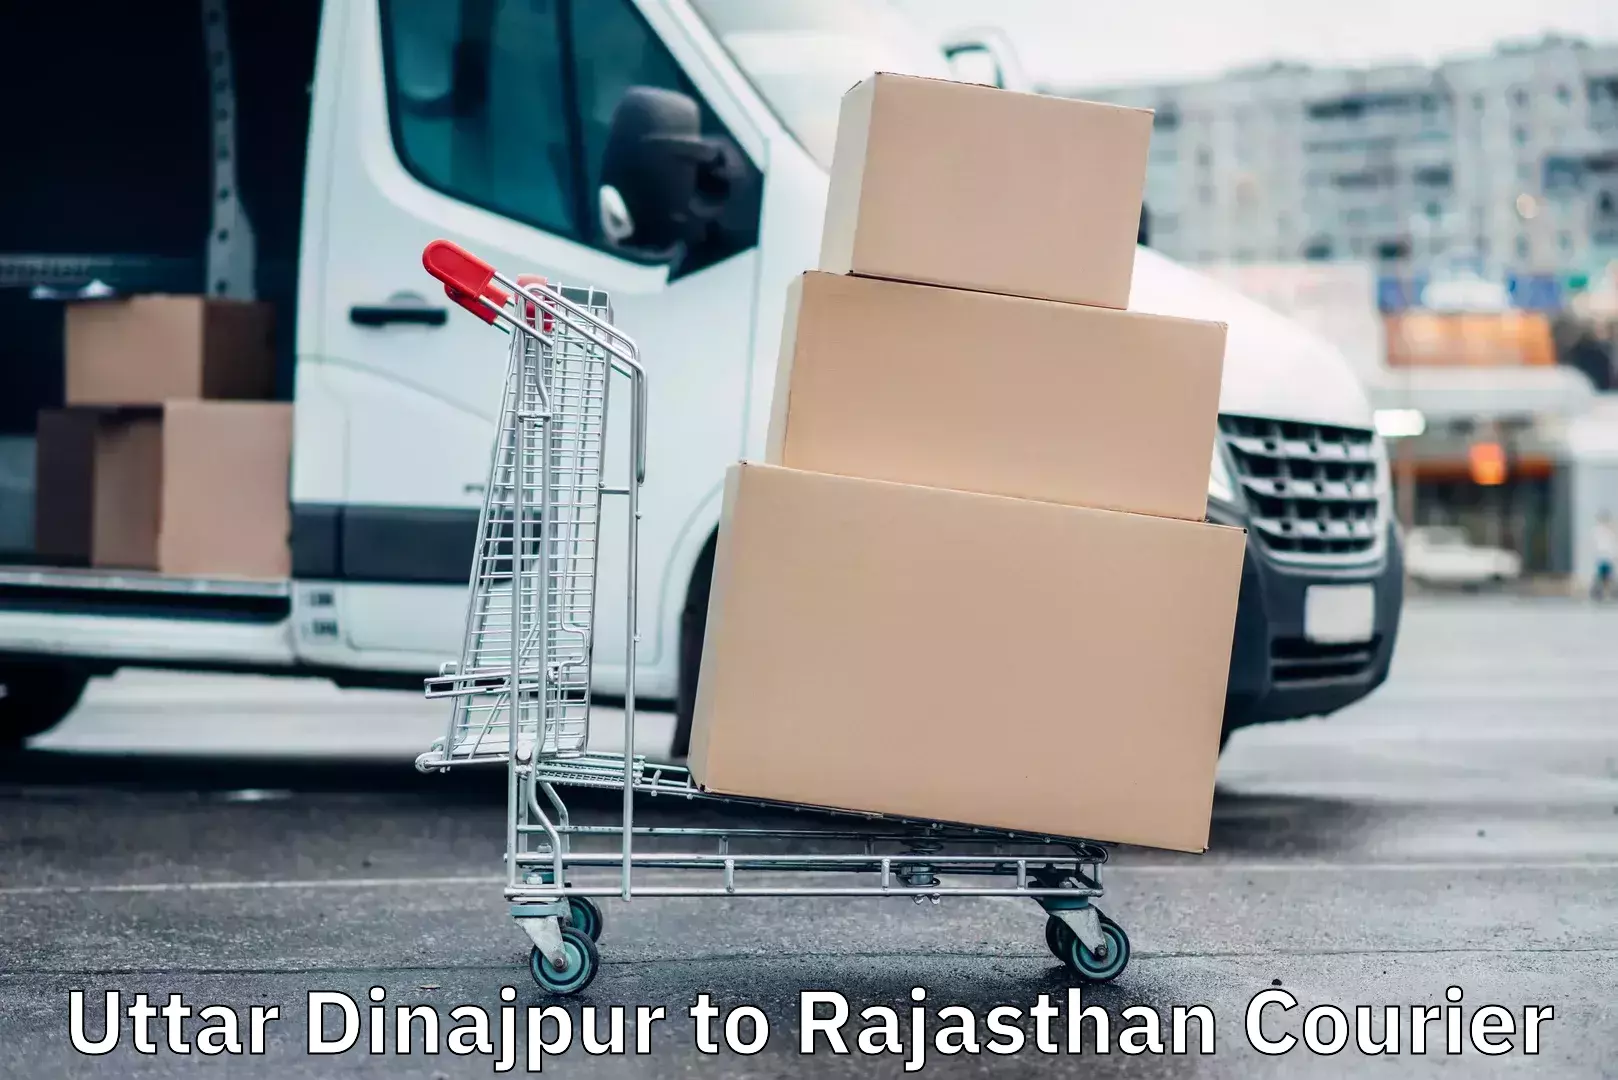 End-to-end delivery Uttar Dinajpur to Rajasthan